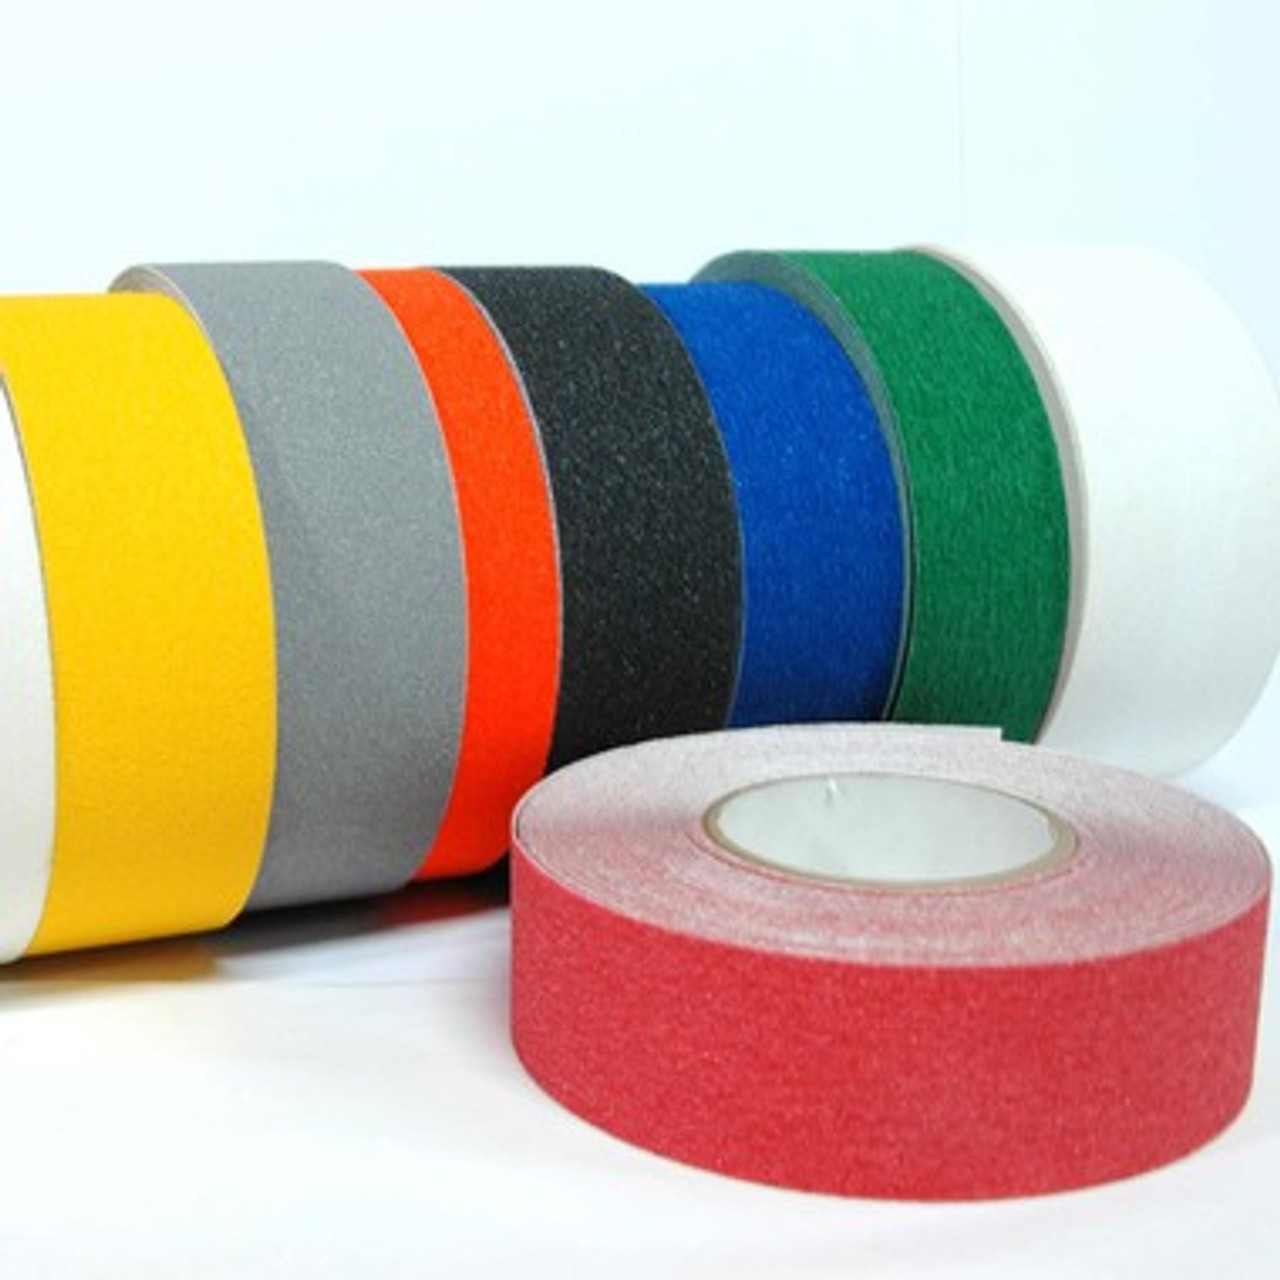 Grip Tape. Anti Slip. Great for Safety and Traction